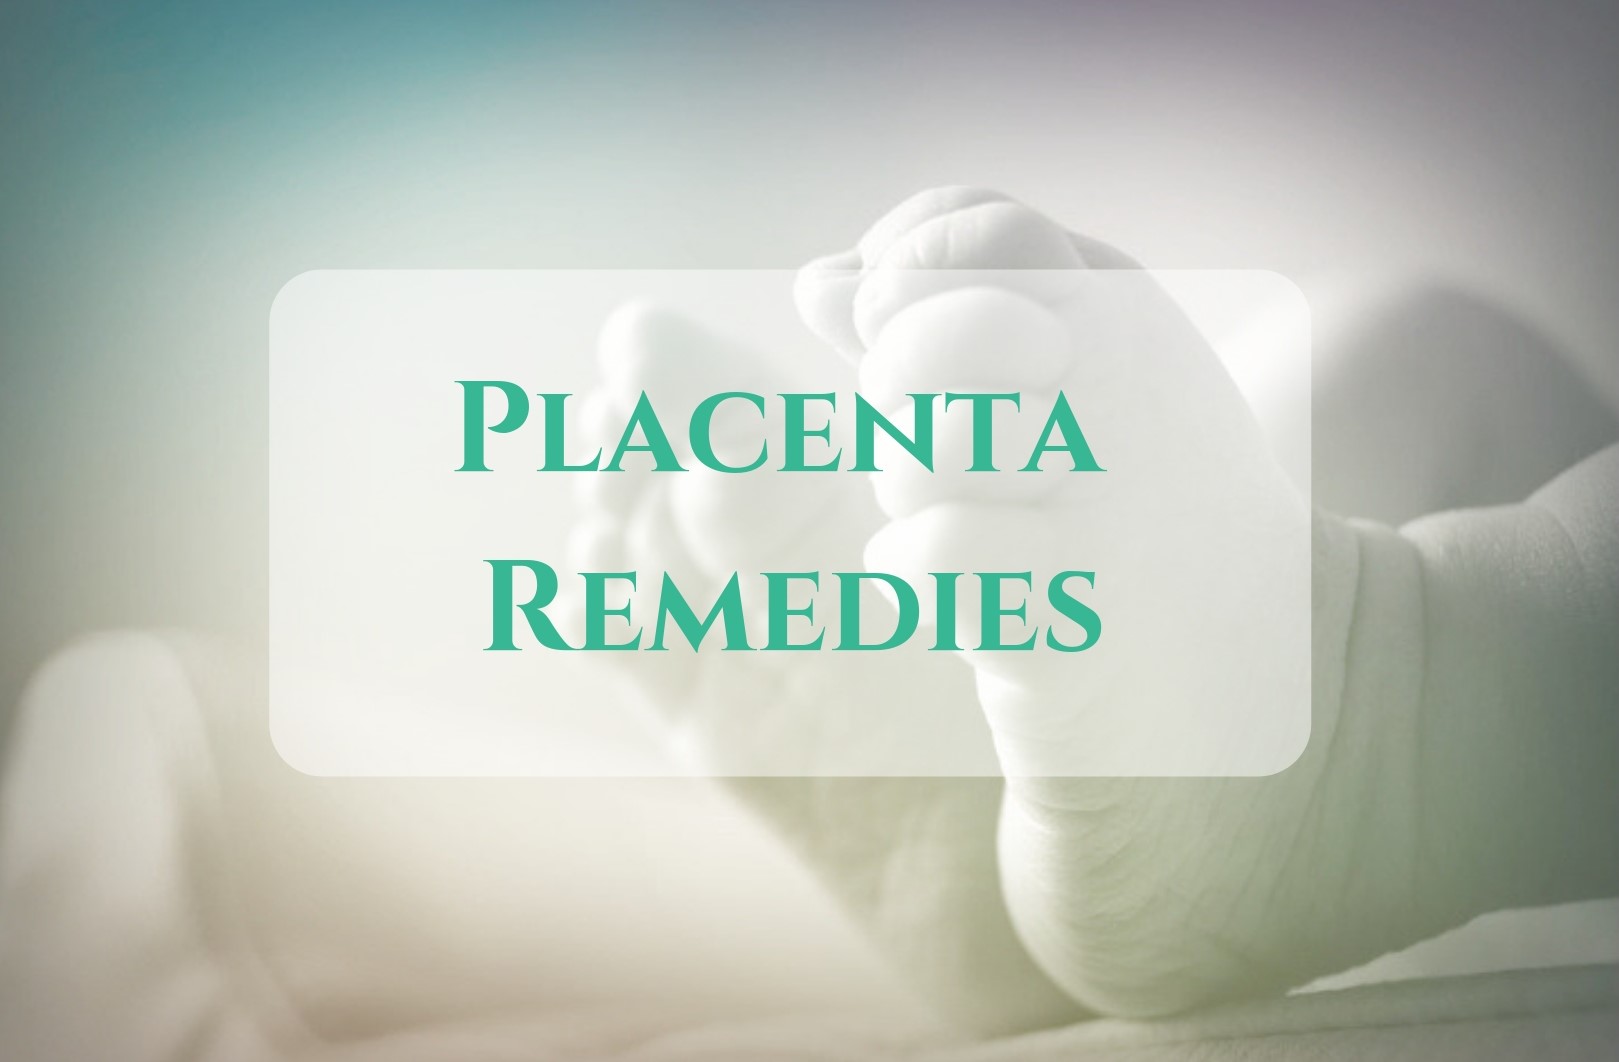 Placenta Encapsulation Remedies available for The Coombe Women & Infants University Hospital, The National Maternity Hospital, Holles St. NMH, The Rotunda Hospital